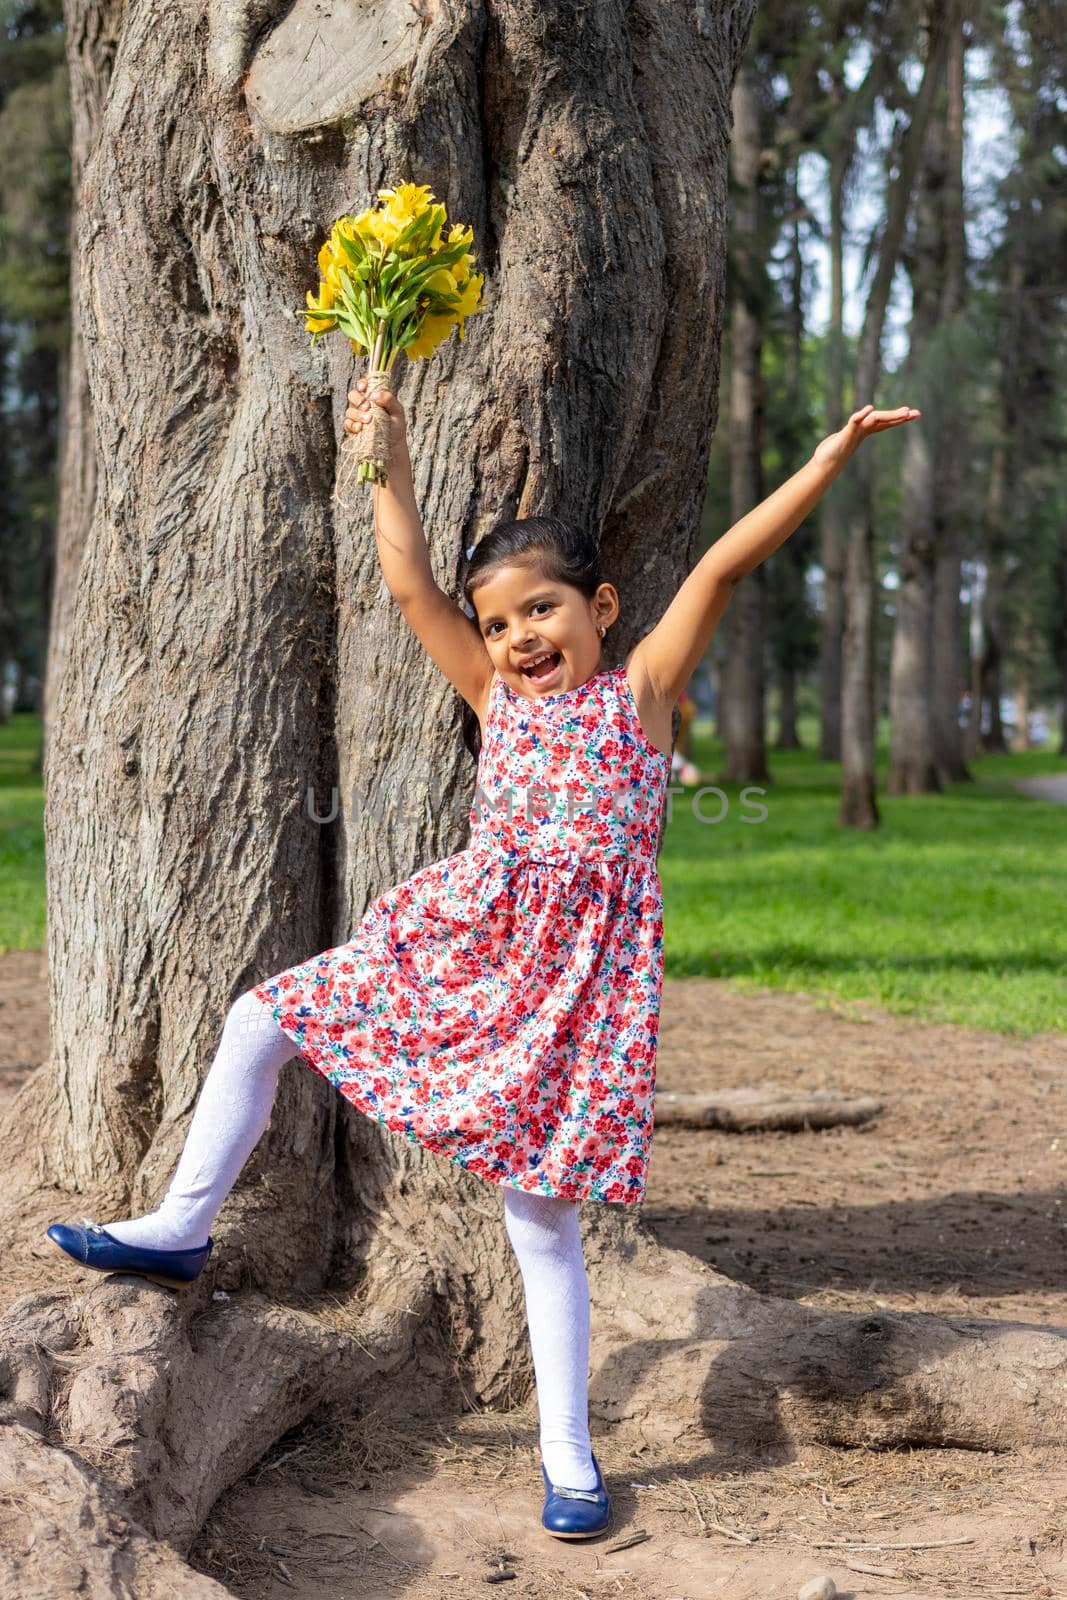 Little girl in dress celebrating in the park with a bouquet of flowers in her hand